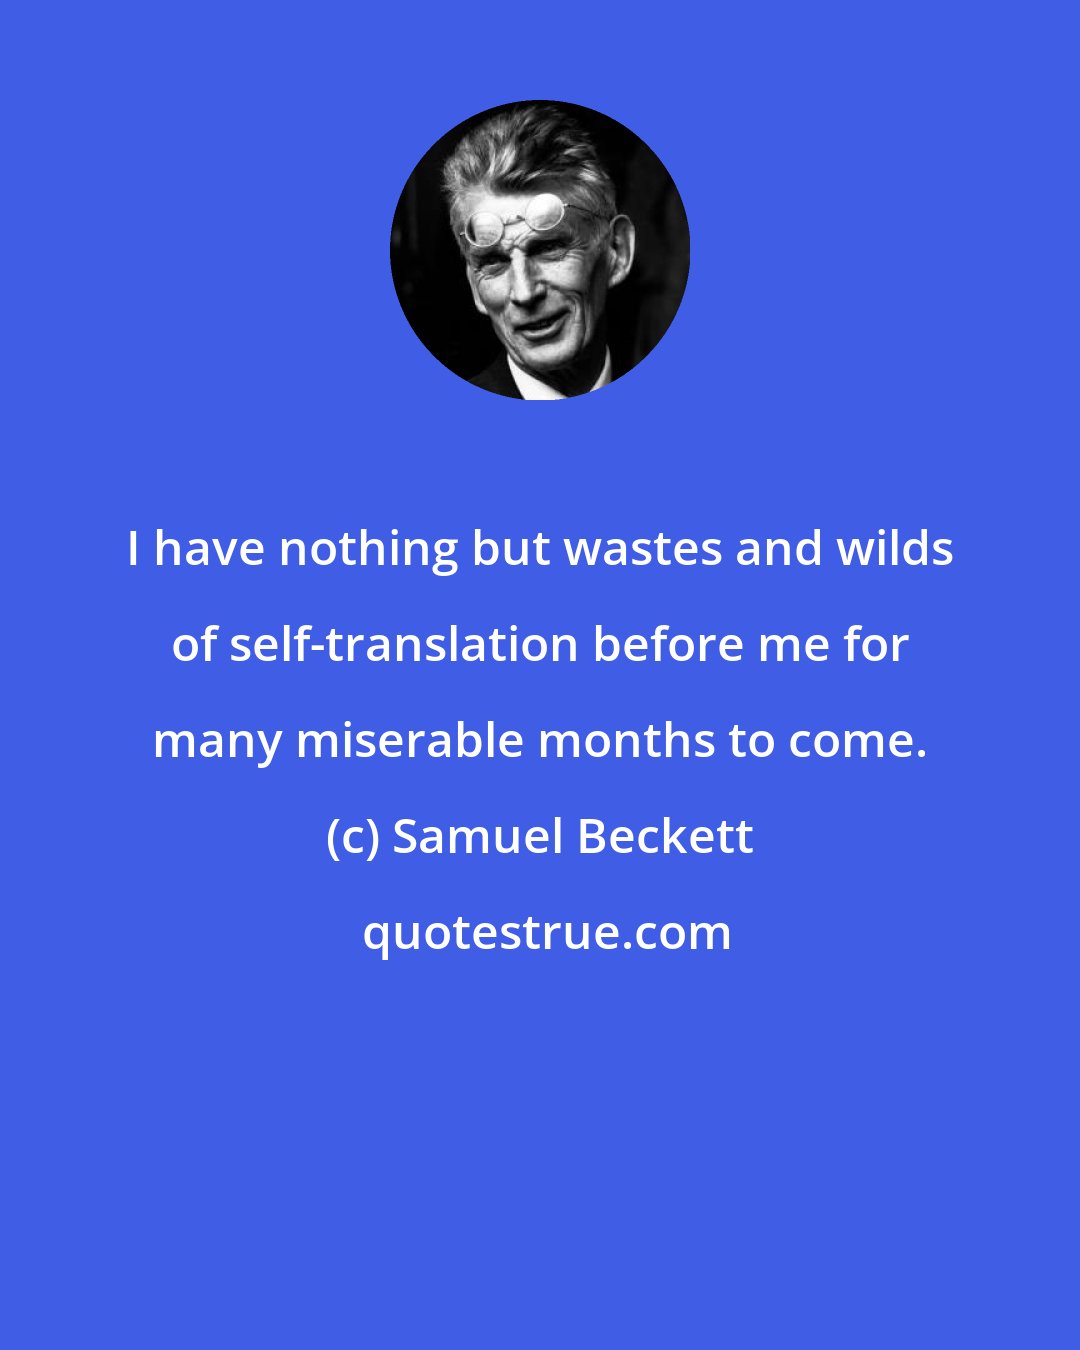 Samuel Beckett: I have nothing but wastes and wilds of self-translation before me for many miserable months to come.